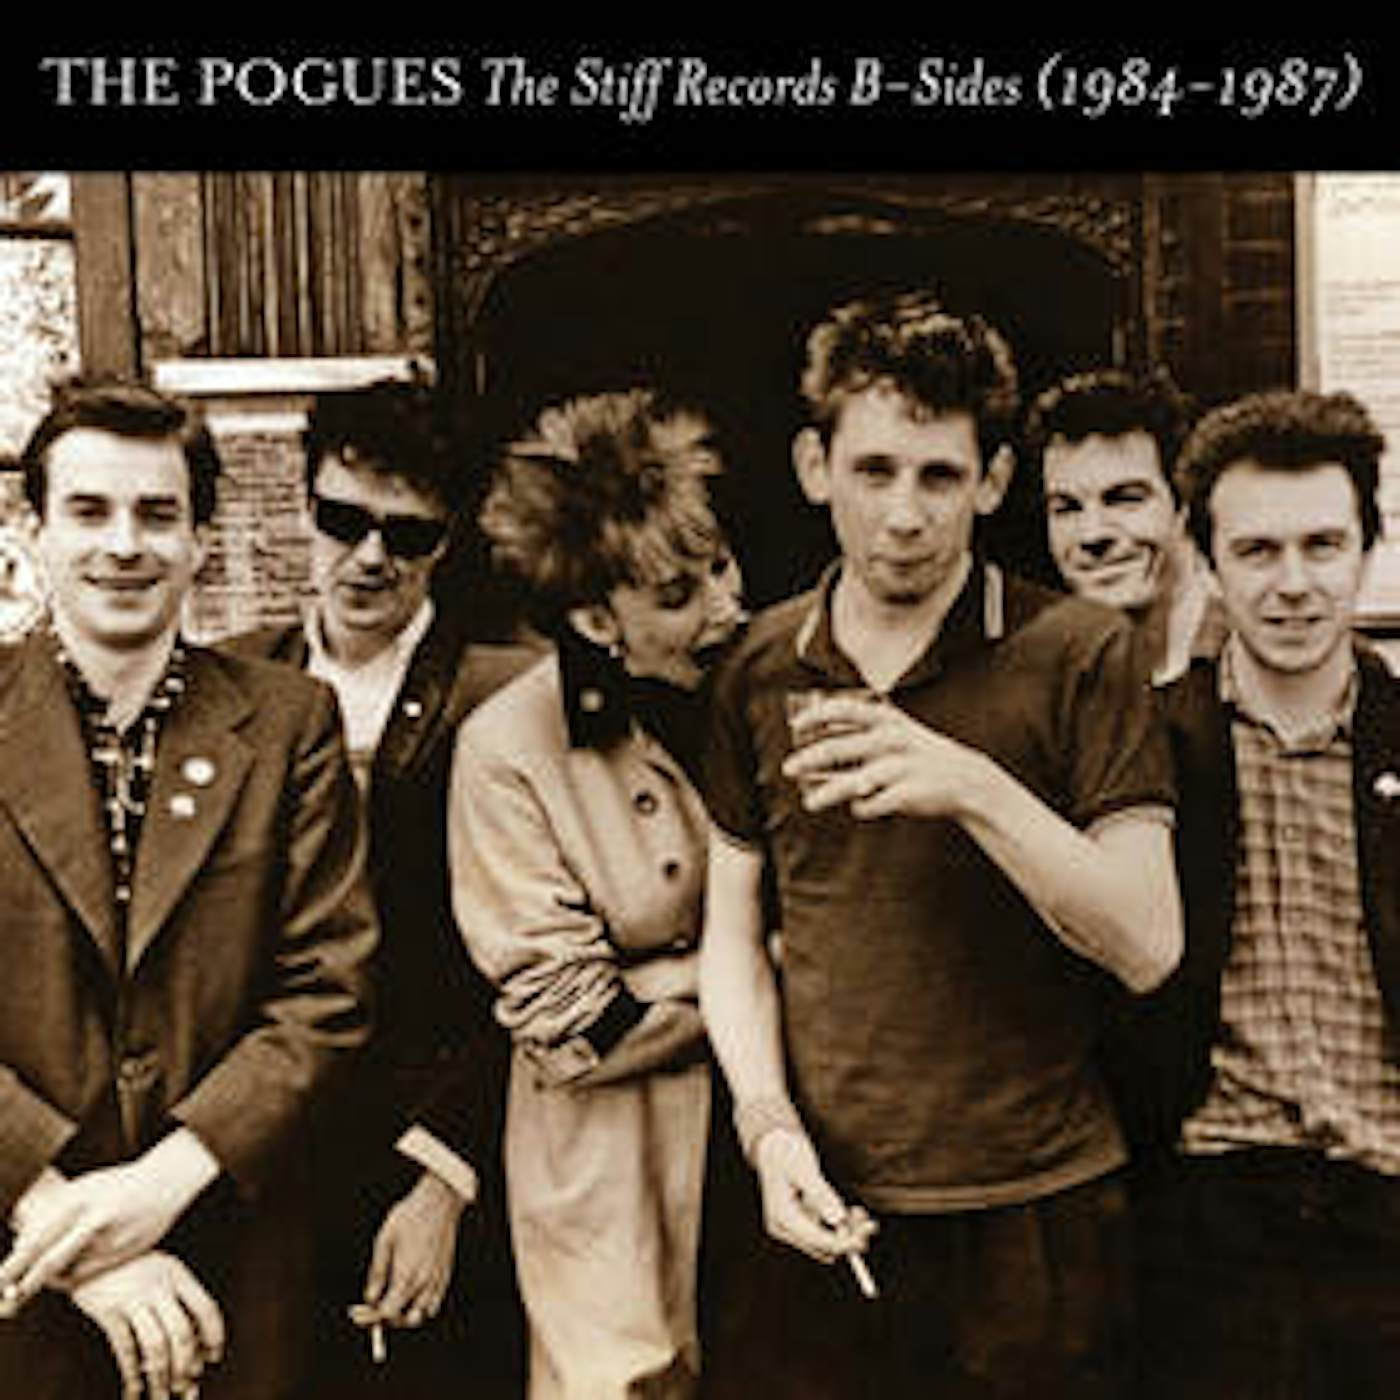 The Pogues - The Stiff Records B-Sides RSD